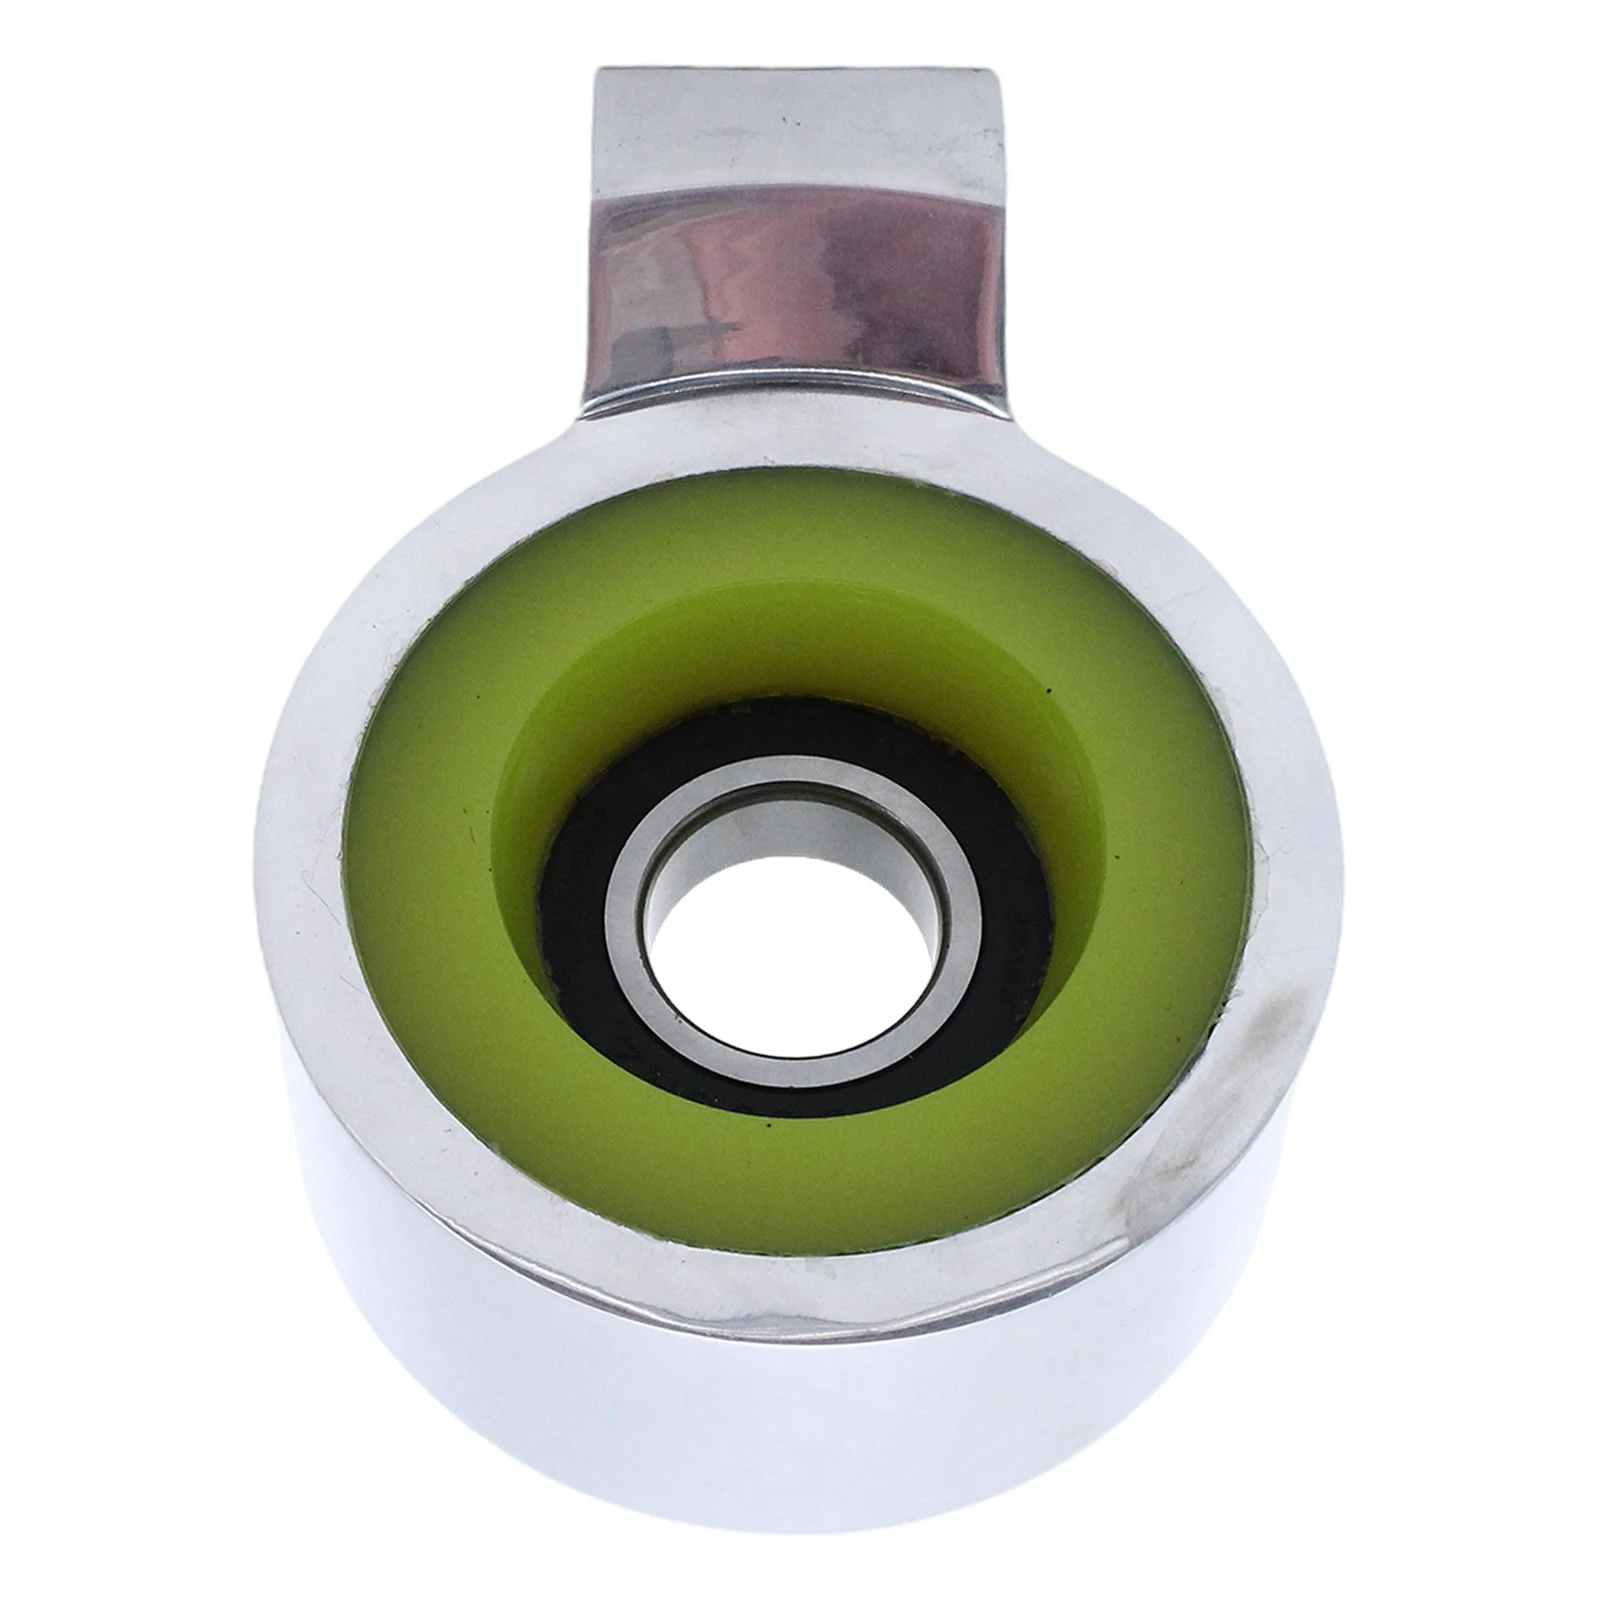 Eavy Duty Carrier Bearing Aluminum Car Parts Fit for Durable